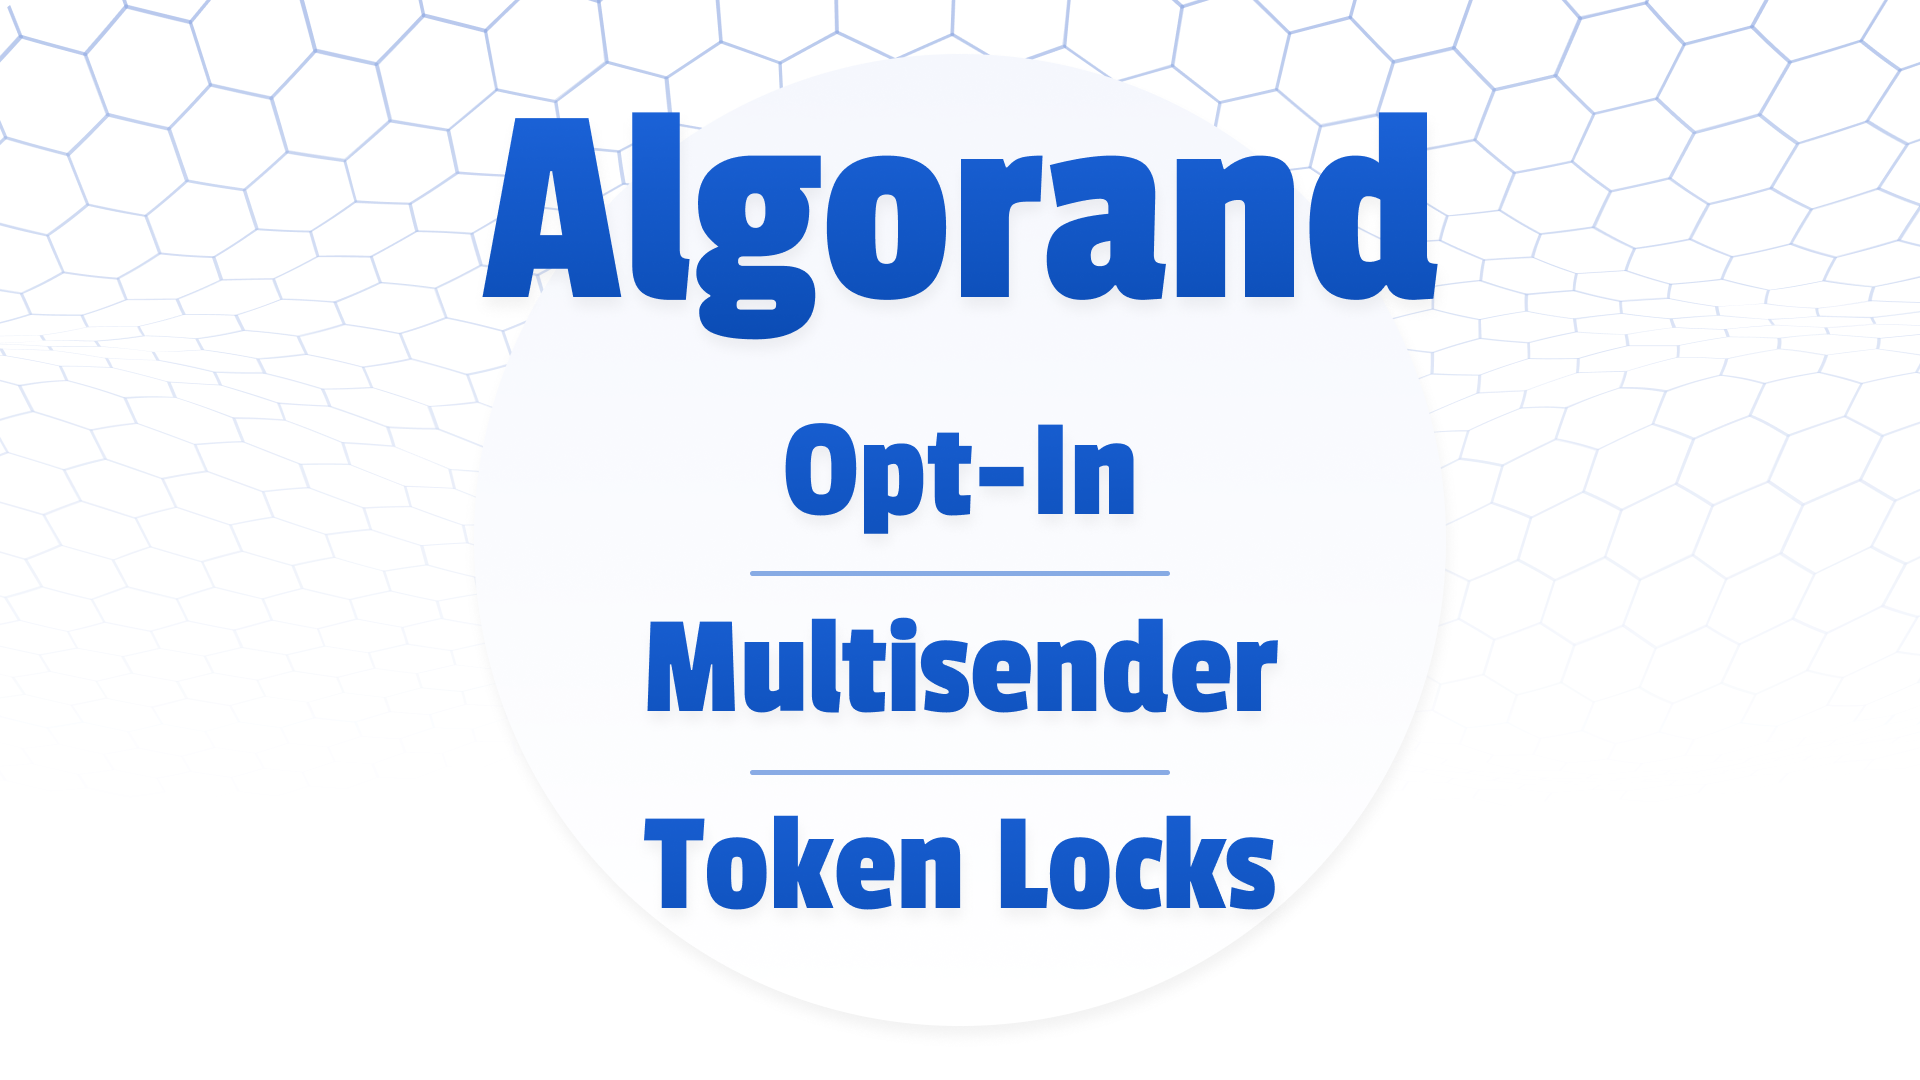 7 Days of Announcements – Day 5: TrustSwap releases a Multisender Tool, Opt-In Tool, and TokenLocks for Algorand